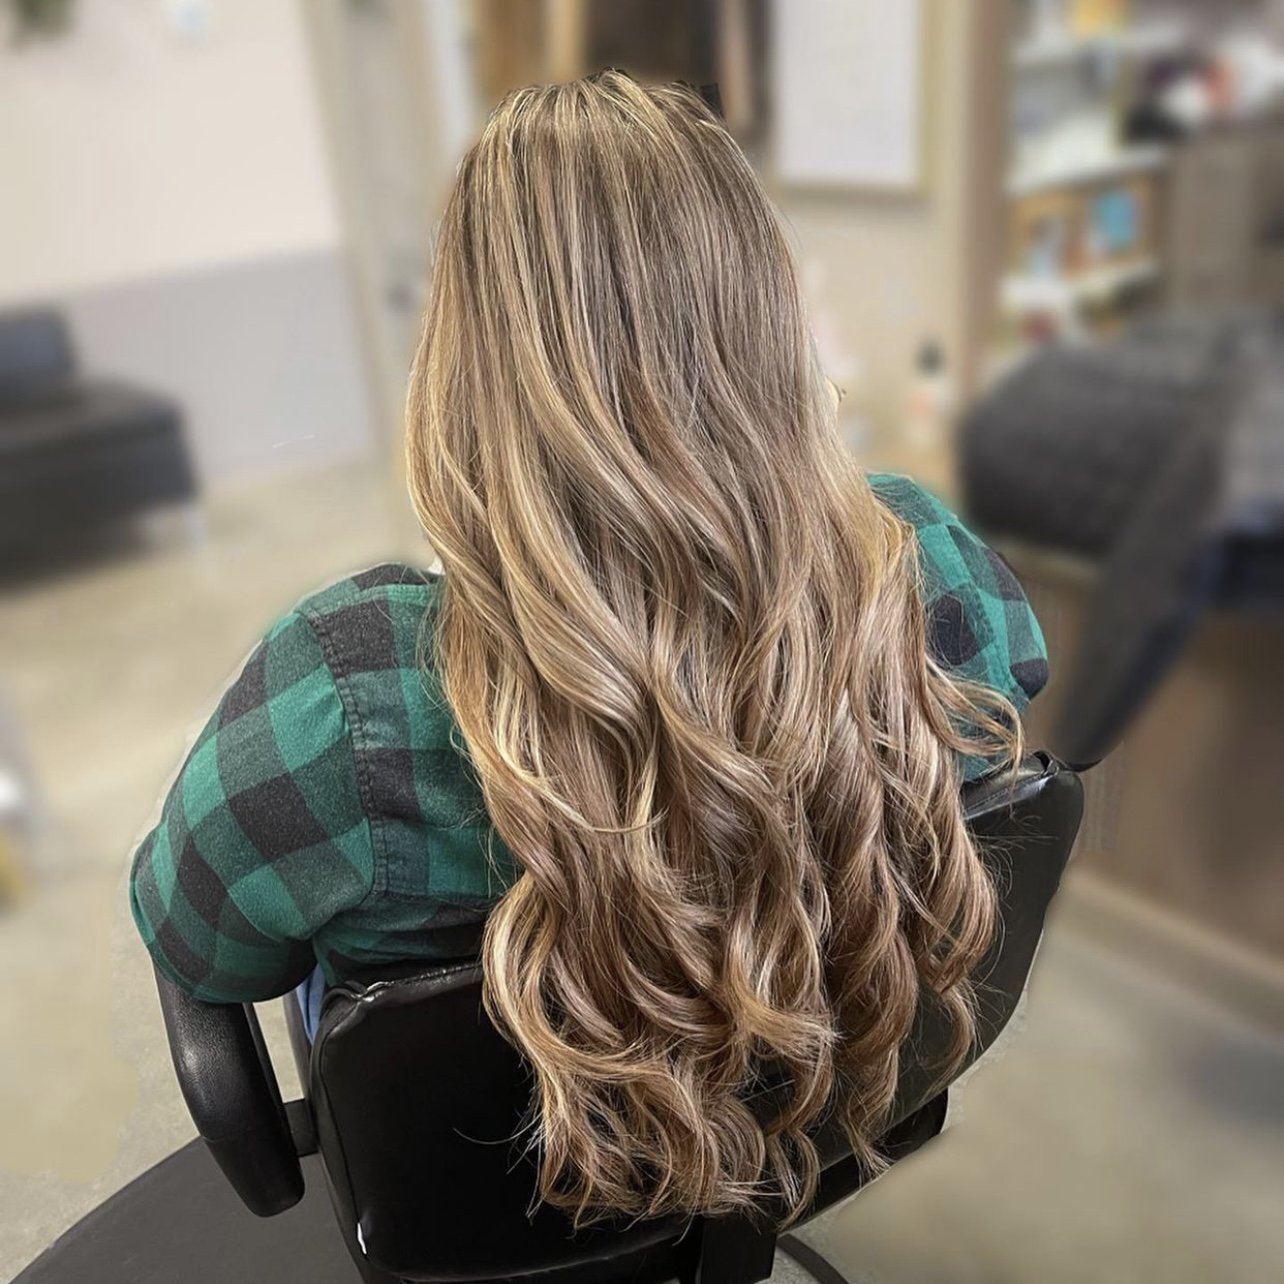 Aundrea Baisley Beauty - A mini balayage or mini foil highlight is my  preferred way to blend in those pesky “natural highlights” 😉 that  typically start showing up around your hairline or